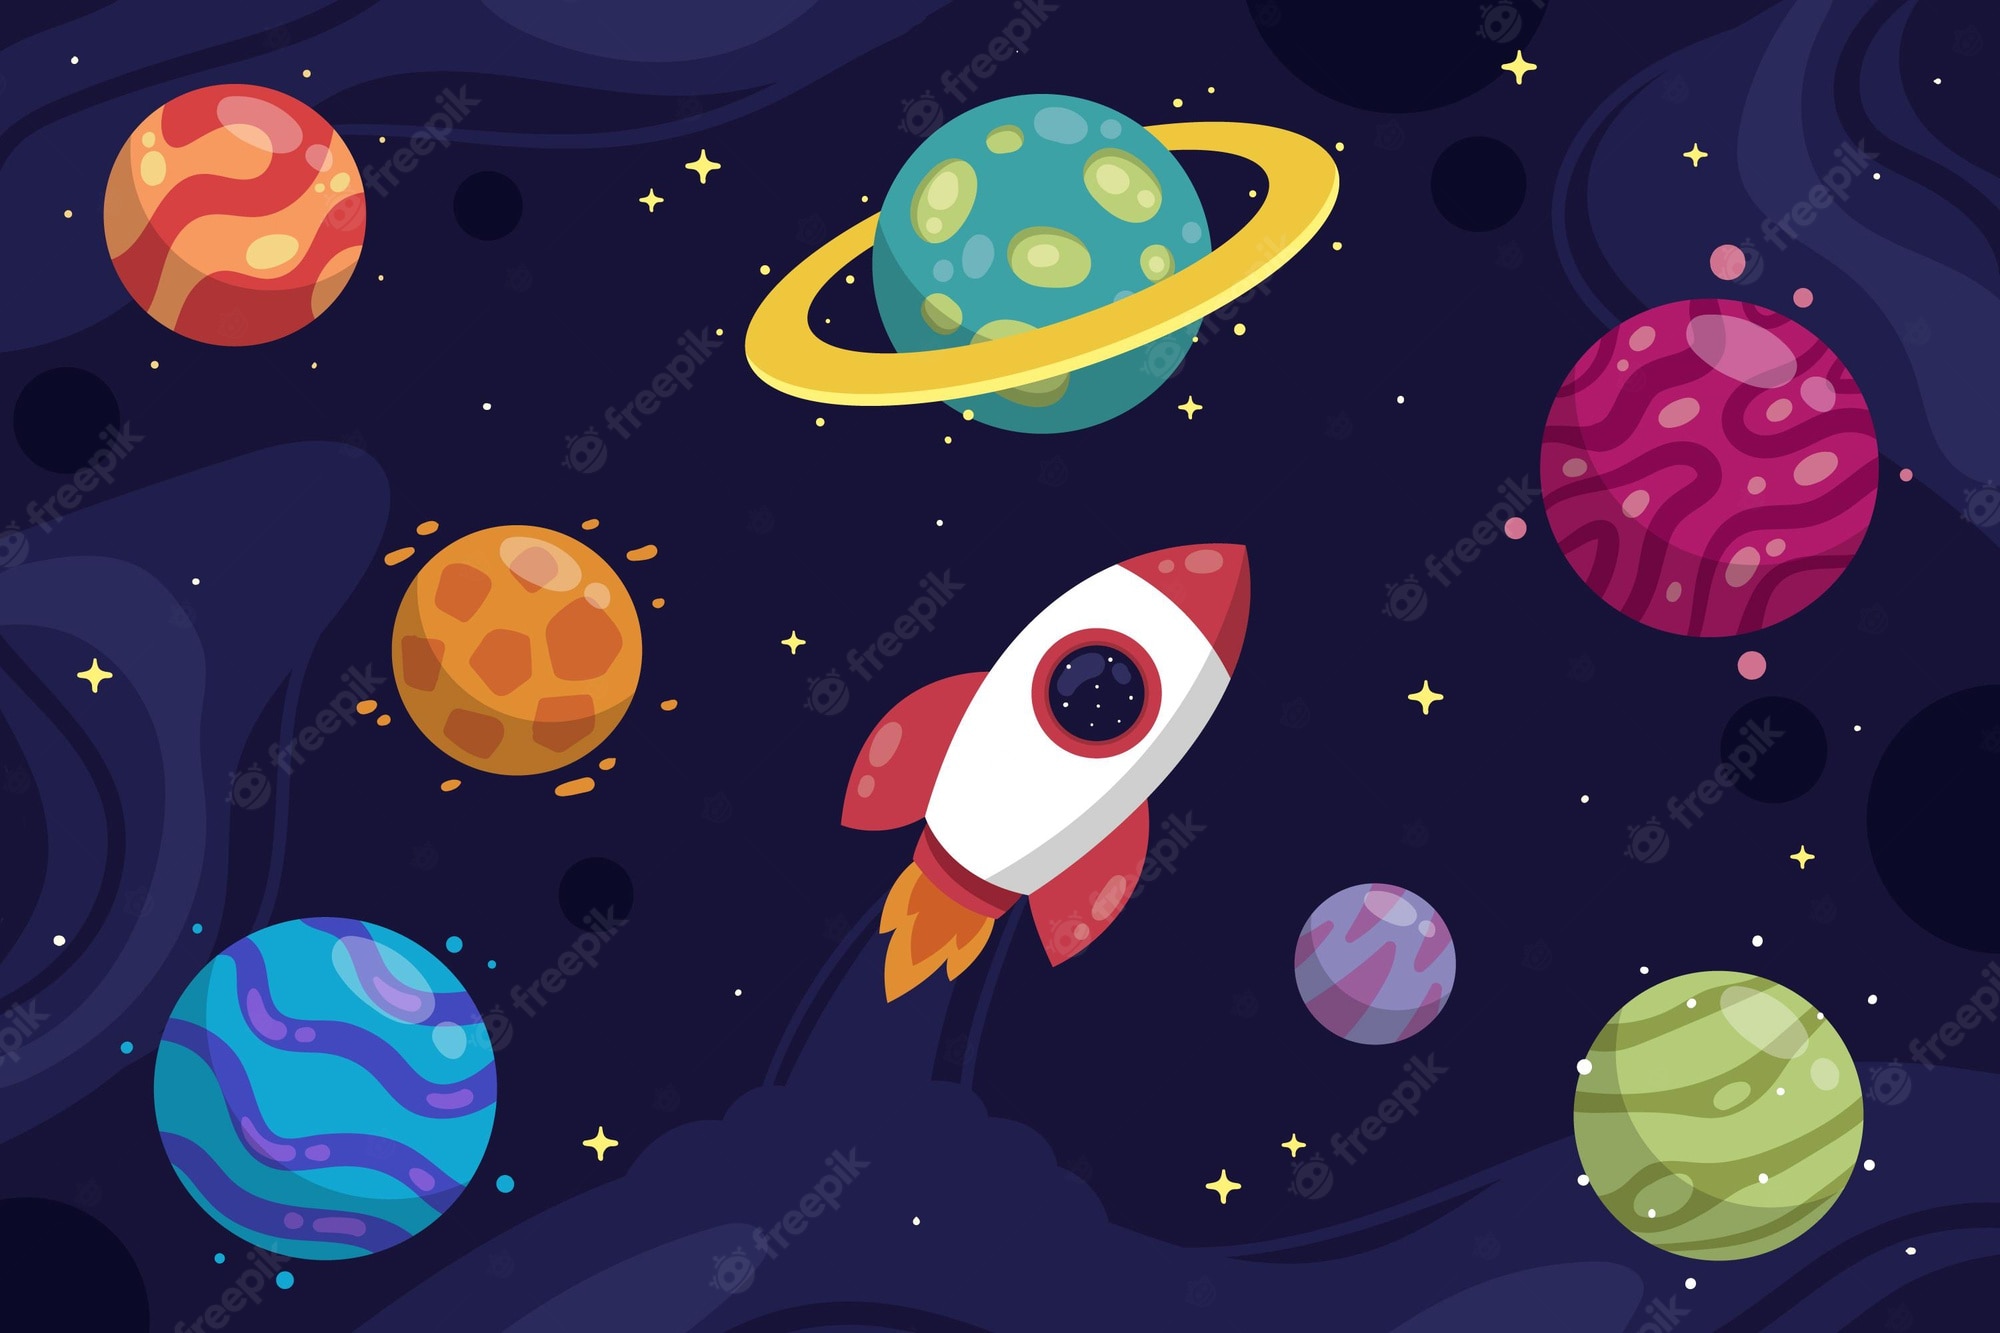 Cartoon Galaxy Cosmic Background Wallpaper Image For Free Download - Pngtree